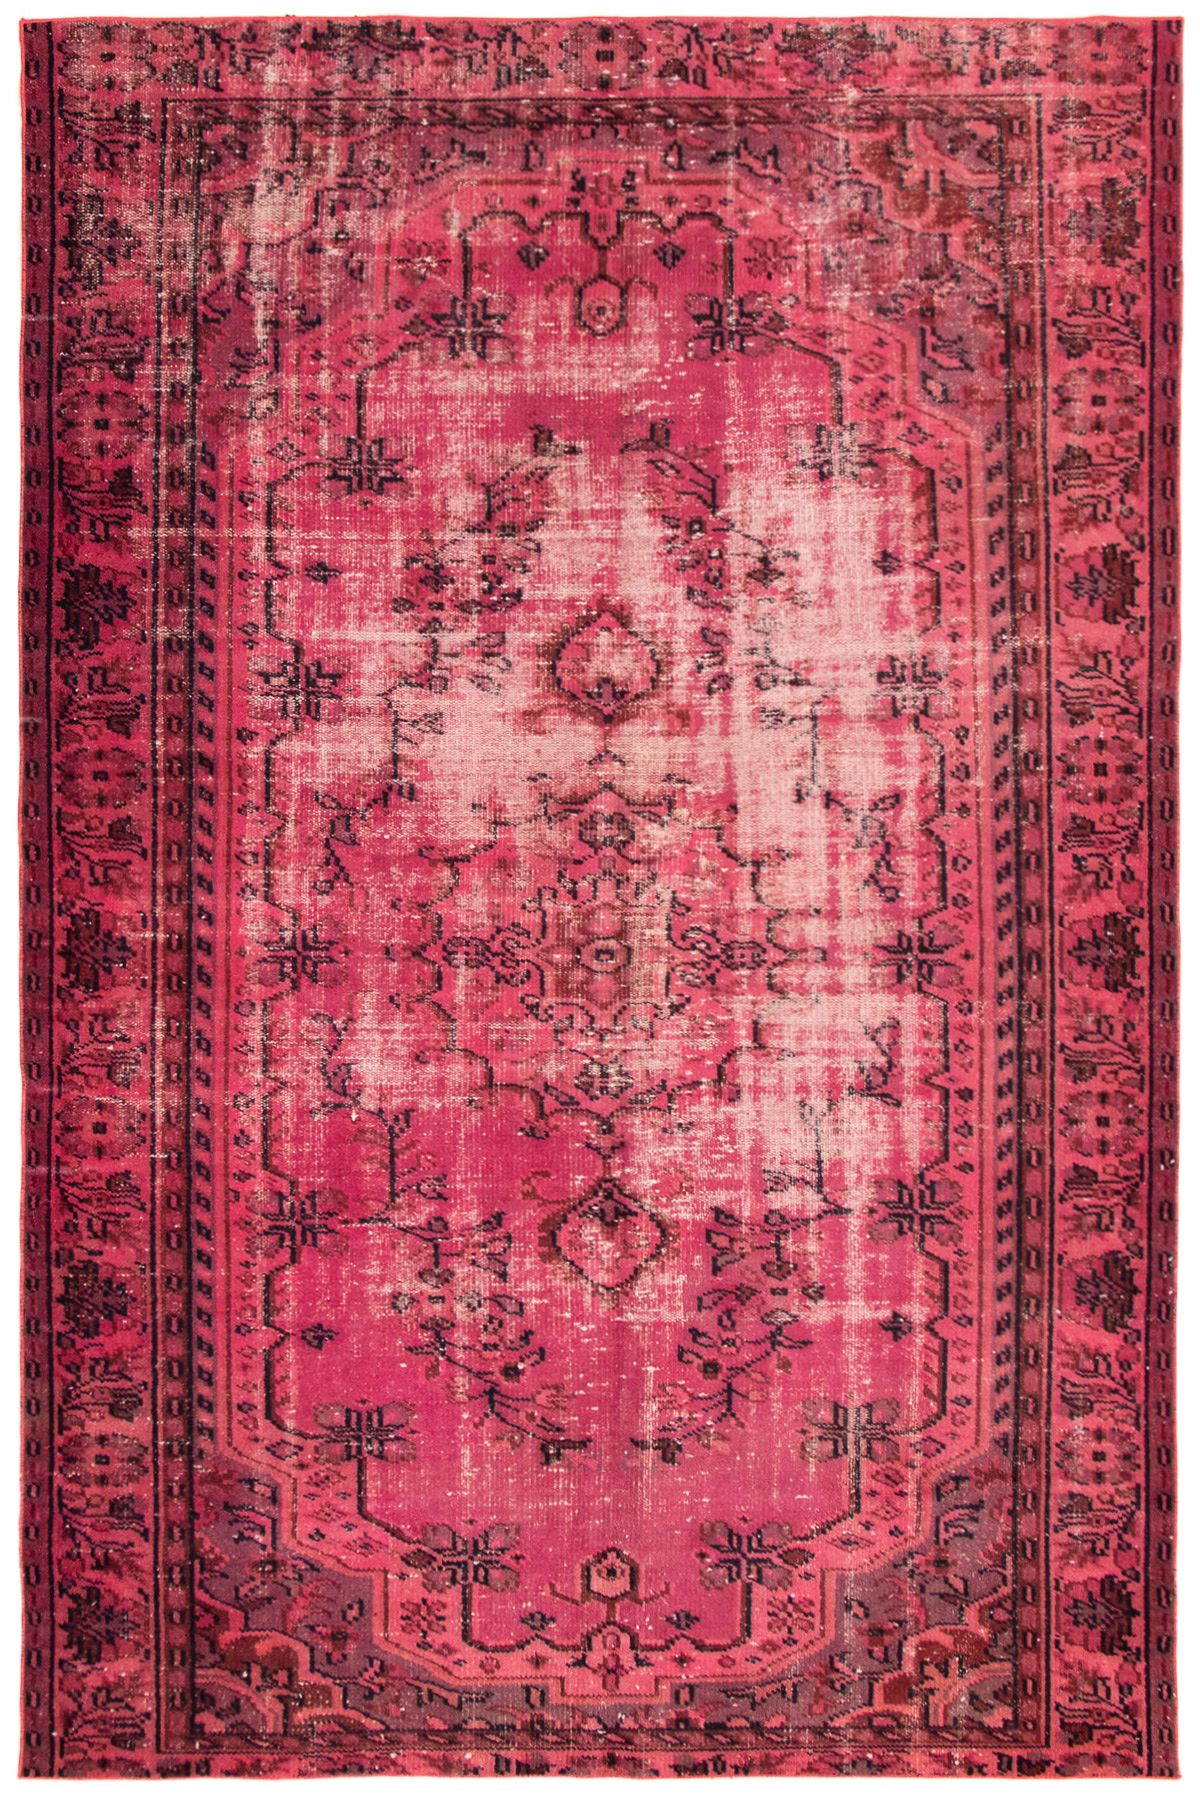 Hand-knotted Color Transition Dark Pink Wool Rug 5'11" x 9'1" Size: 5'11" x 9'1"  